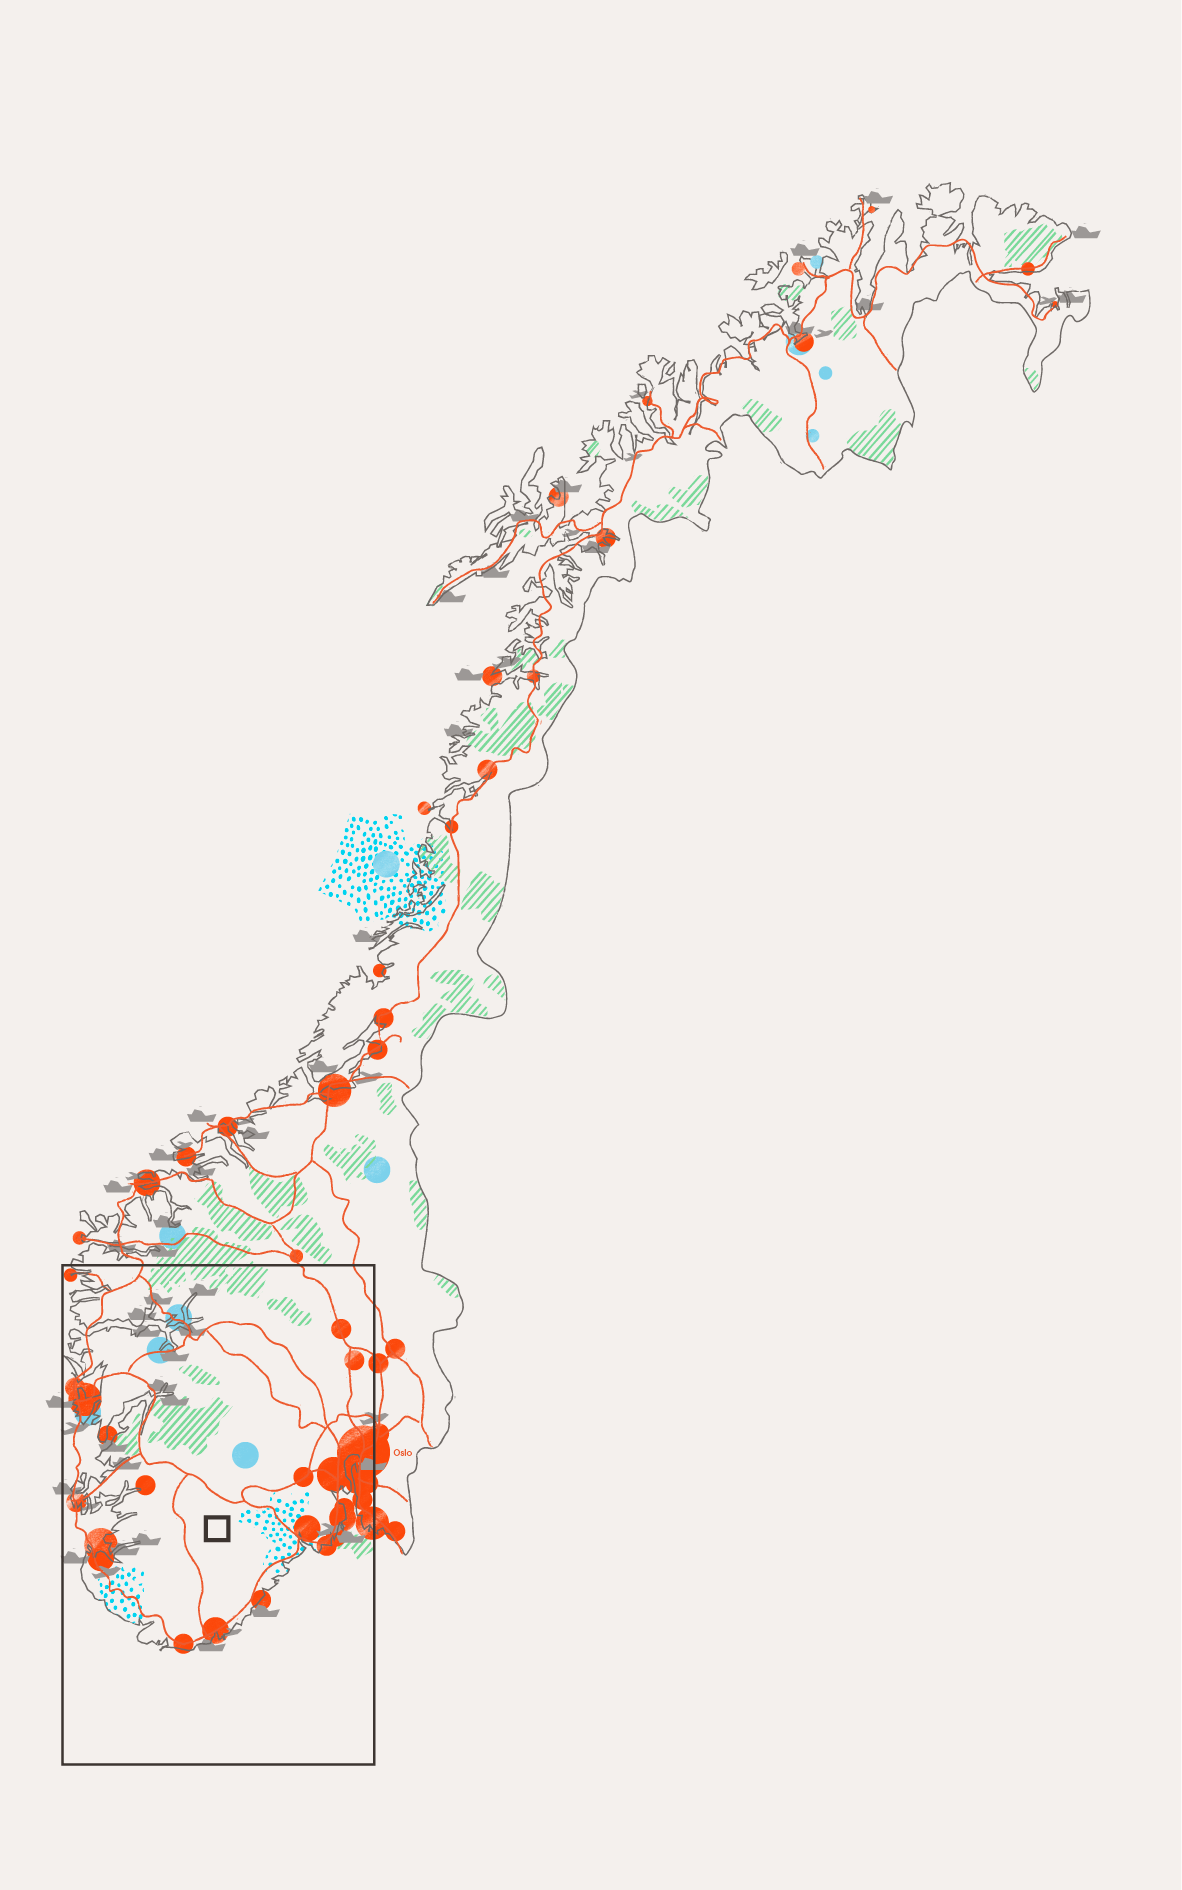 Norway, illustrated map.